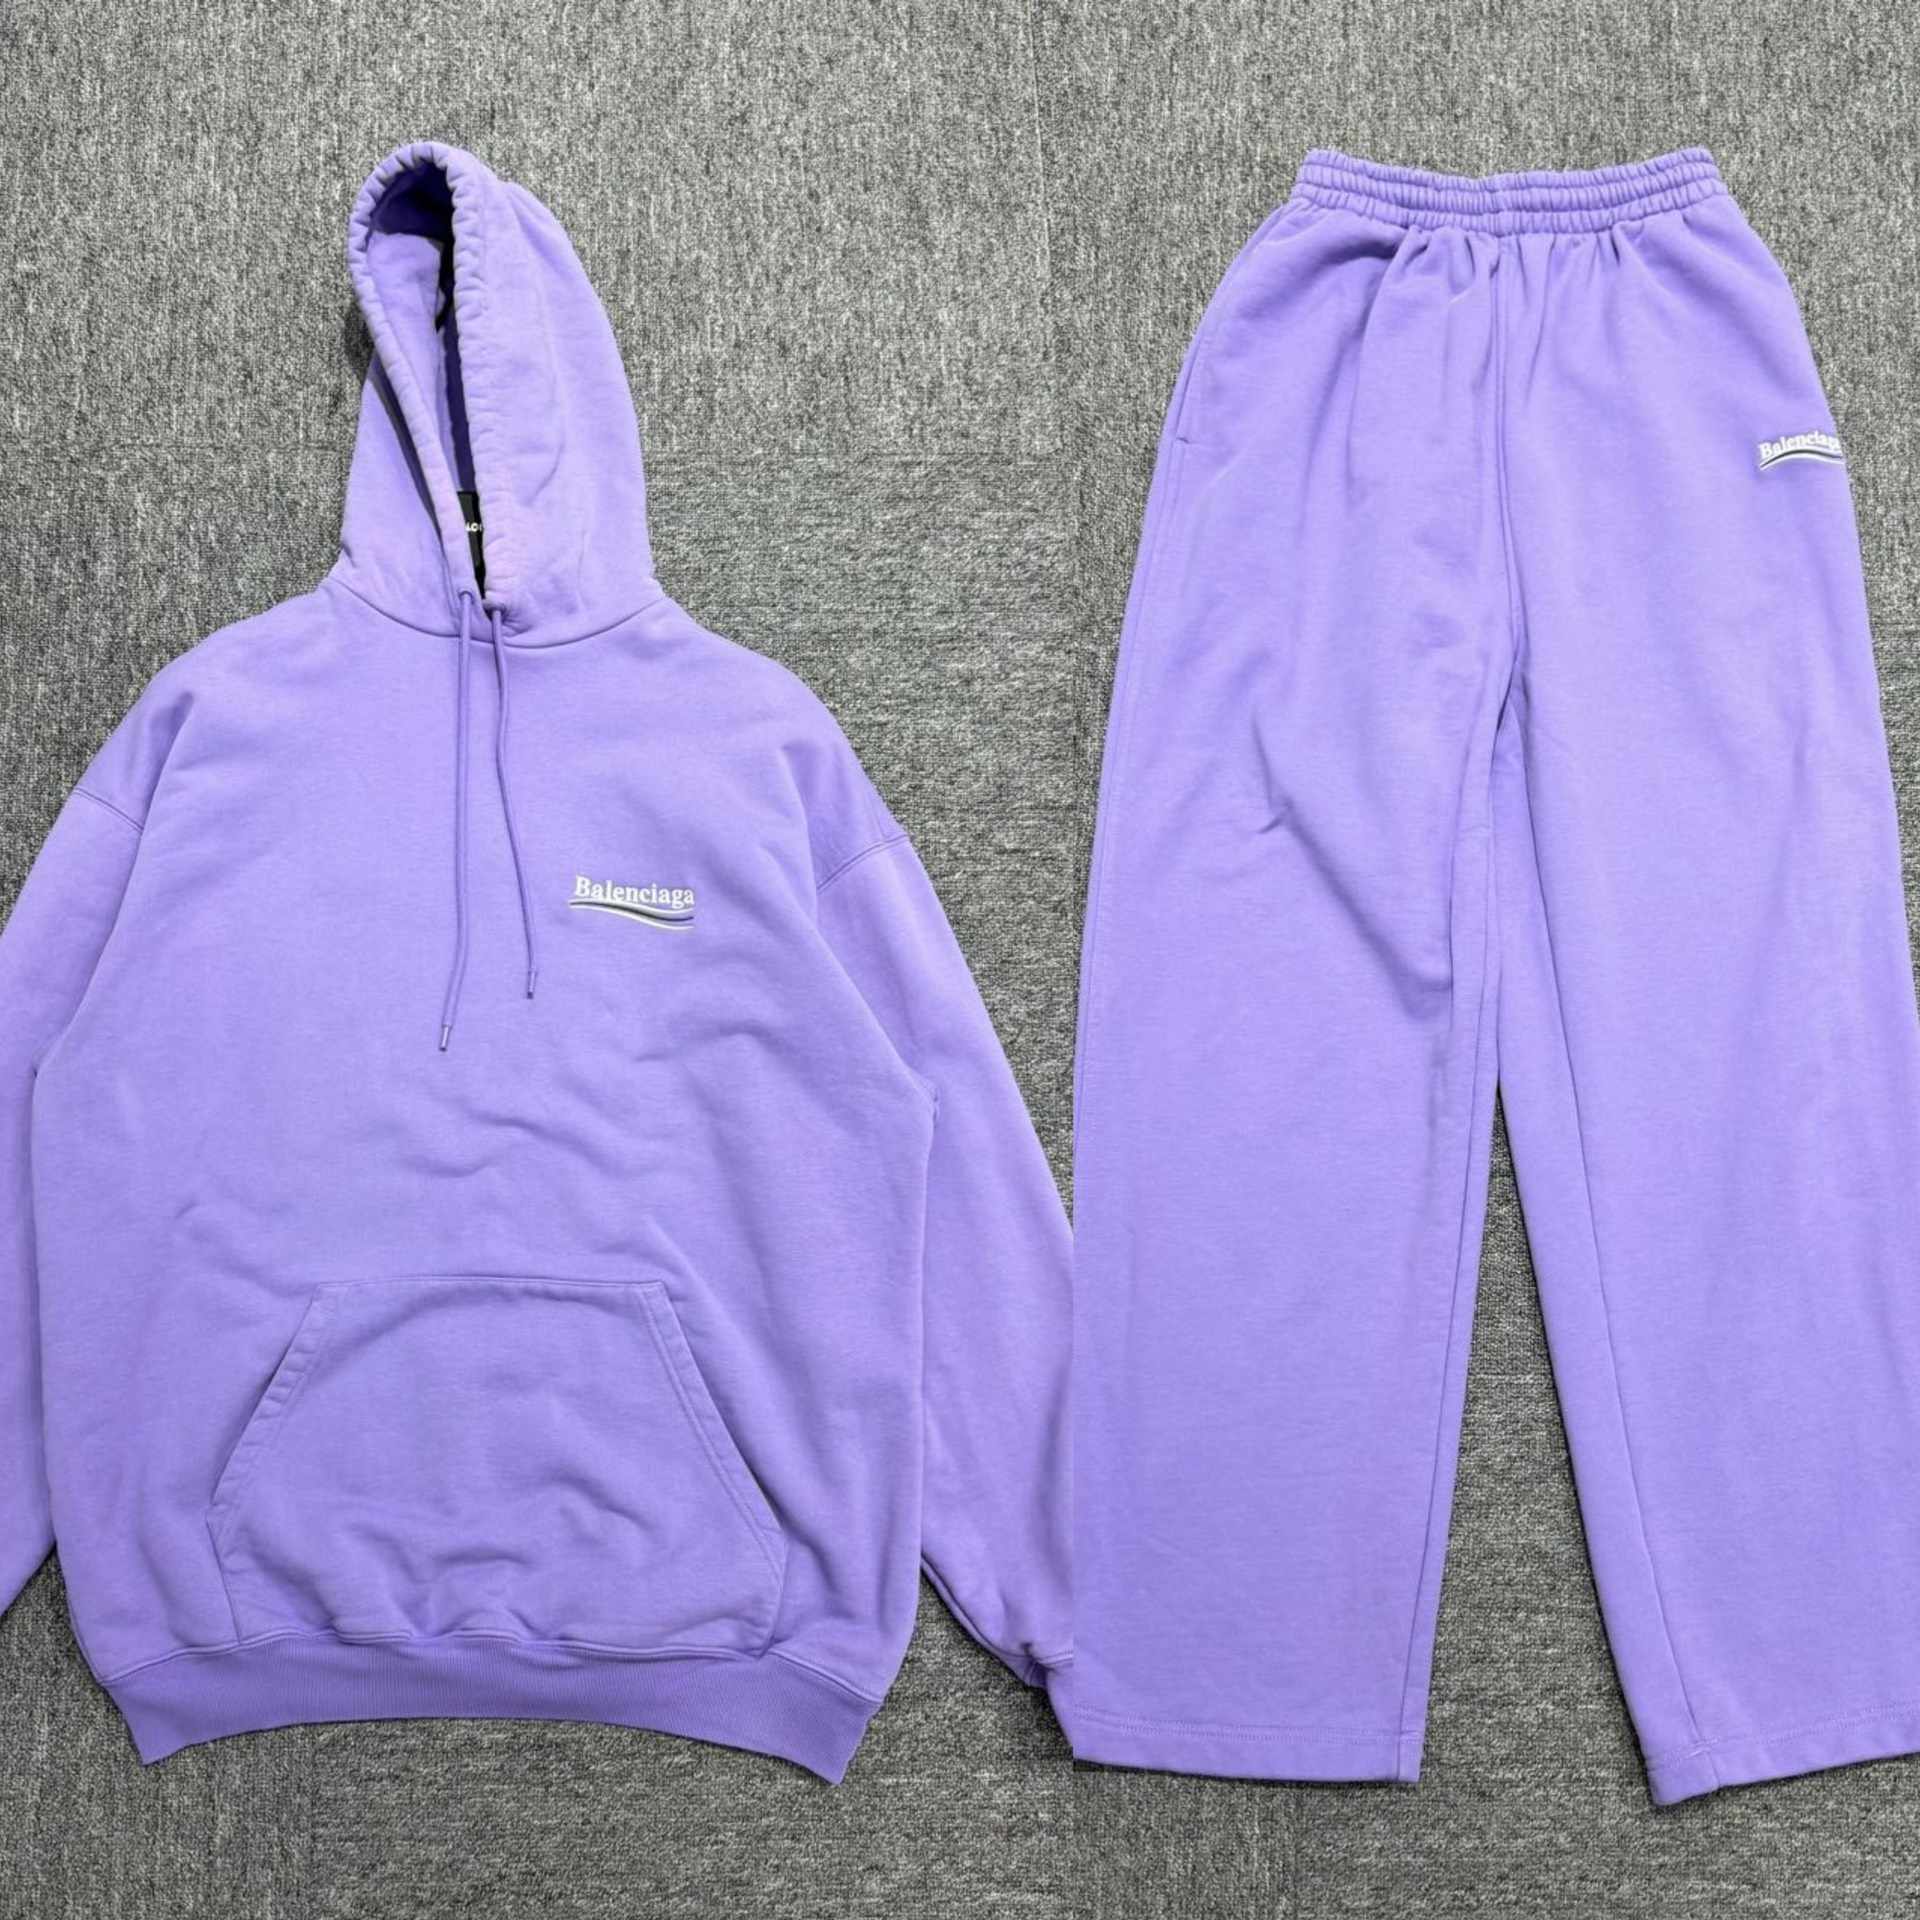 Balenciaga Lavender Embroidered Wave Hoodie and Jogger Set - 5